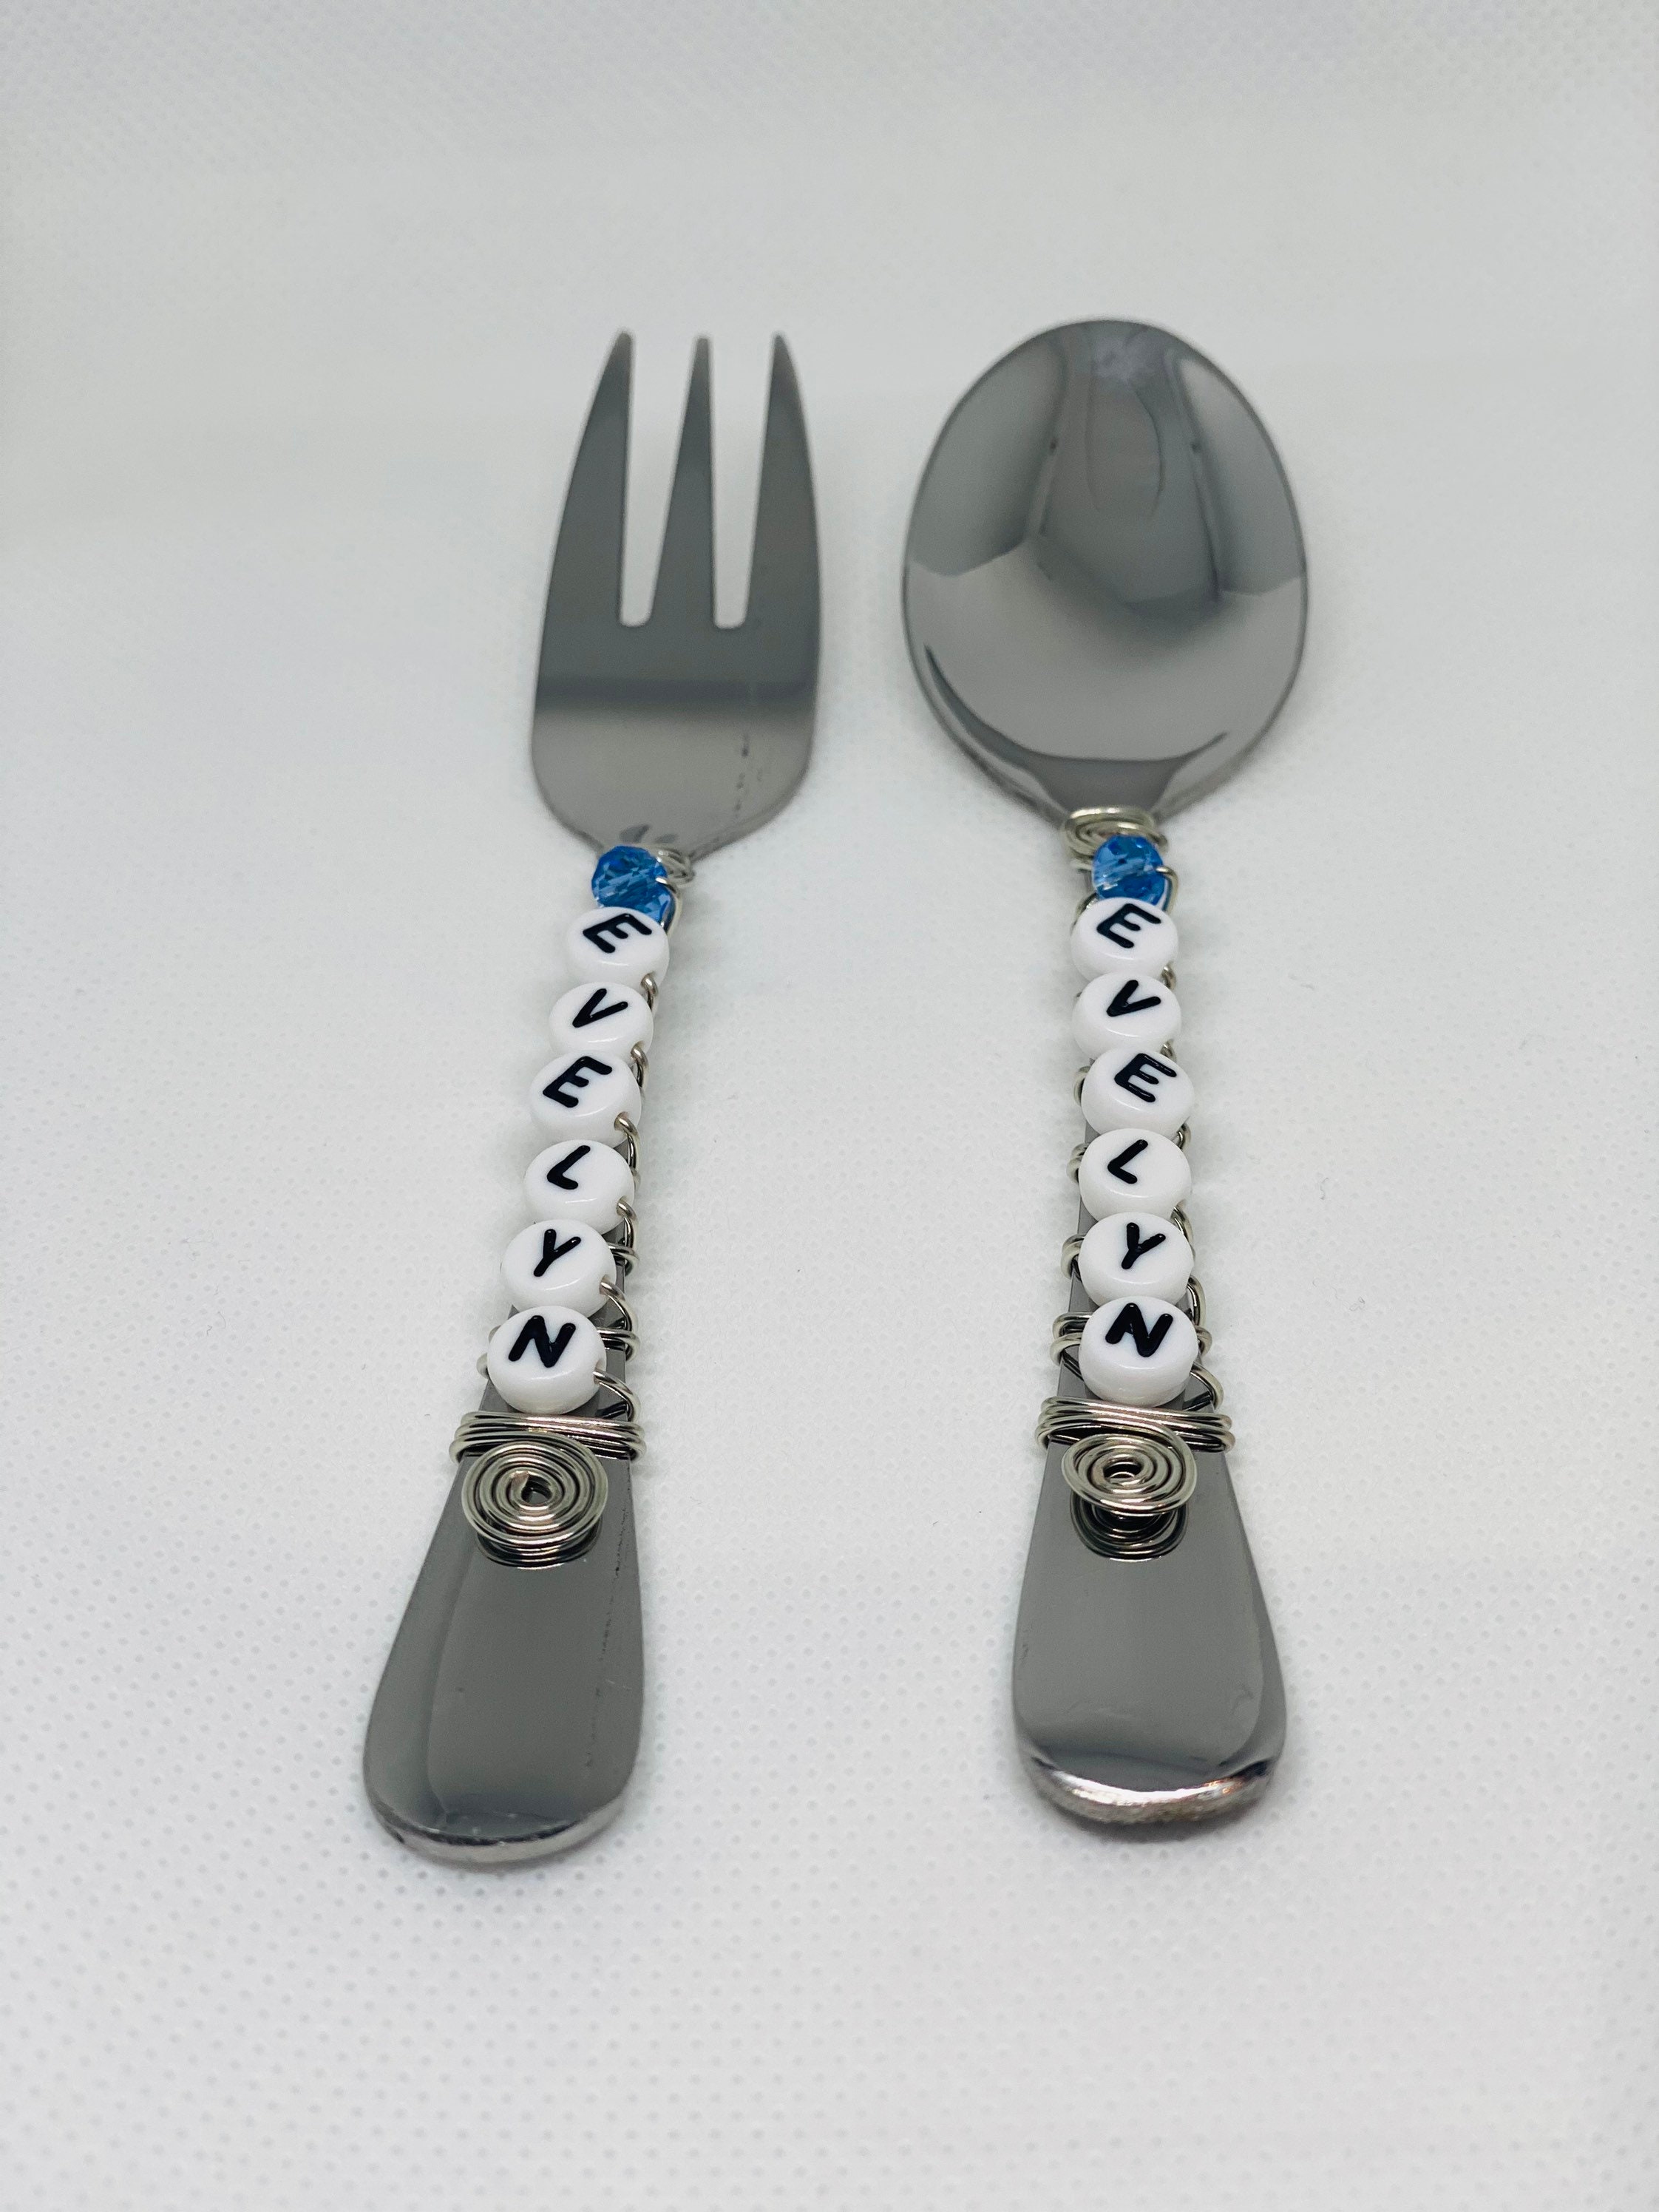 Personalized Lunch Box Silverware 2 Piece Set Beaded Stainless